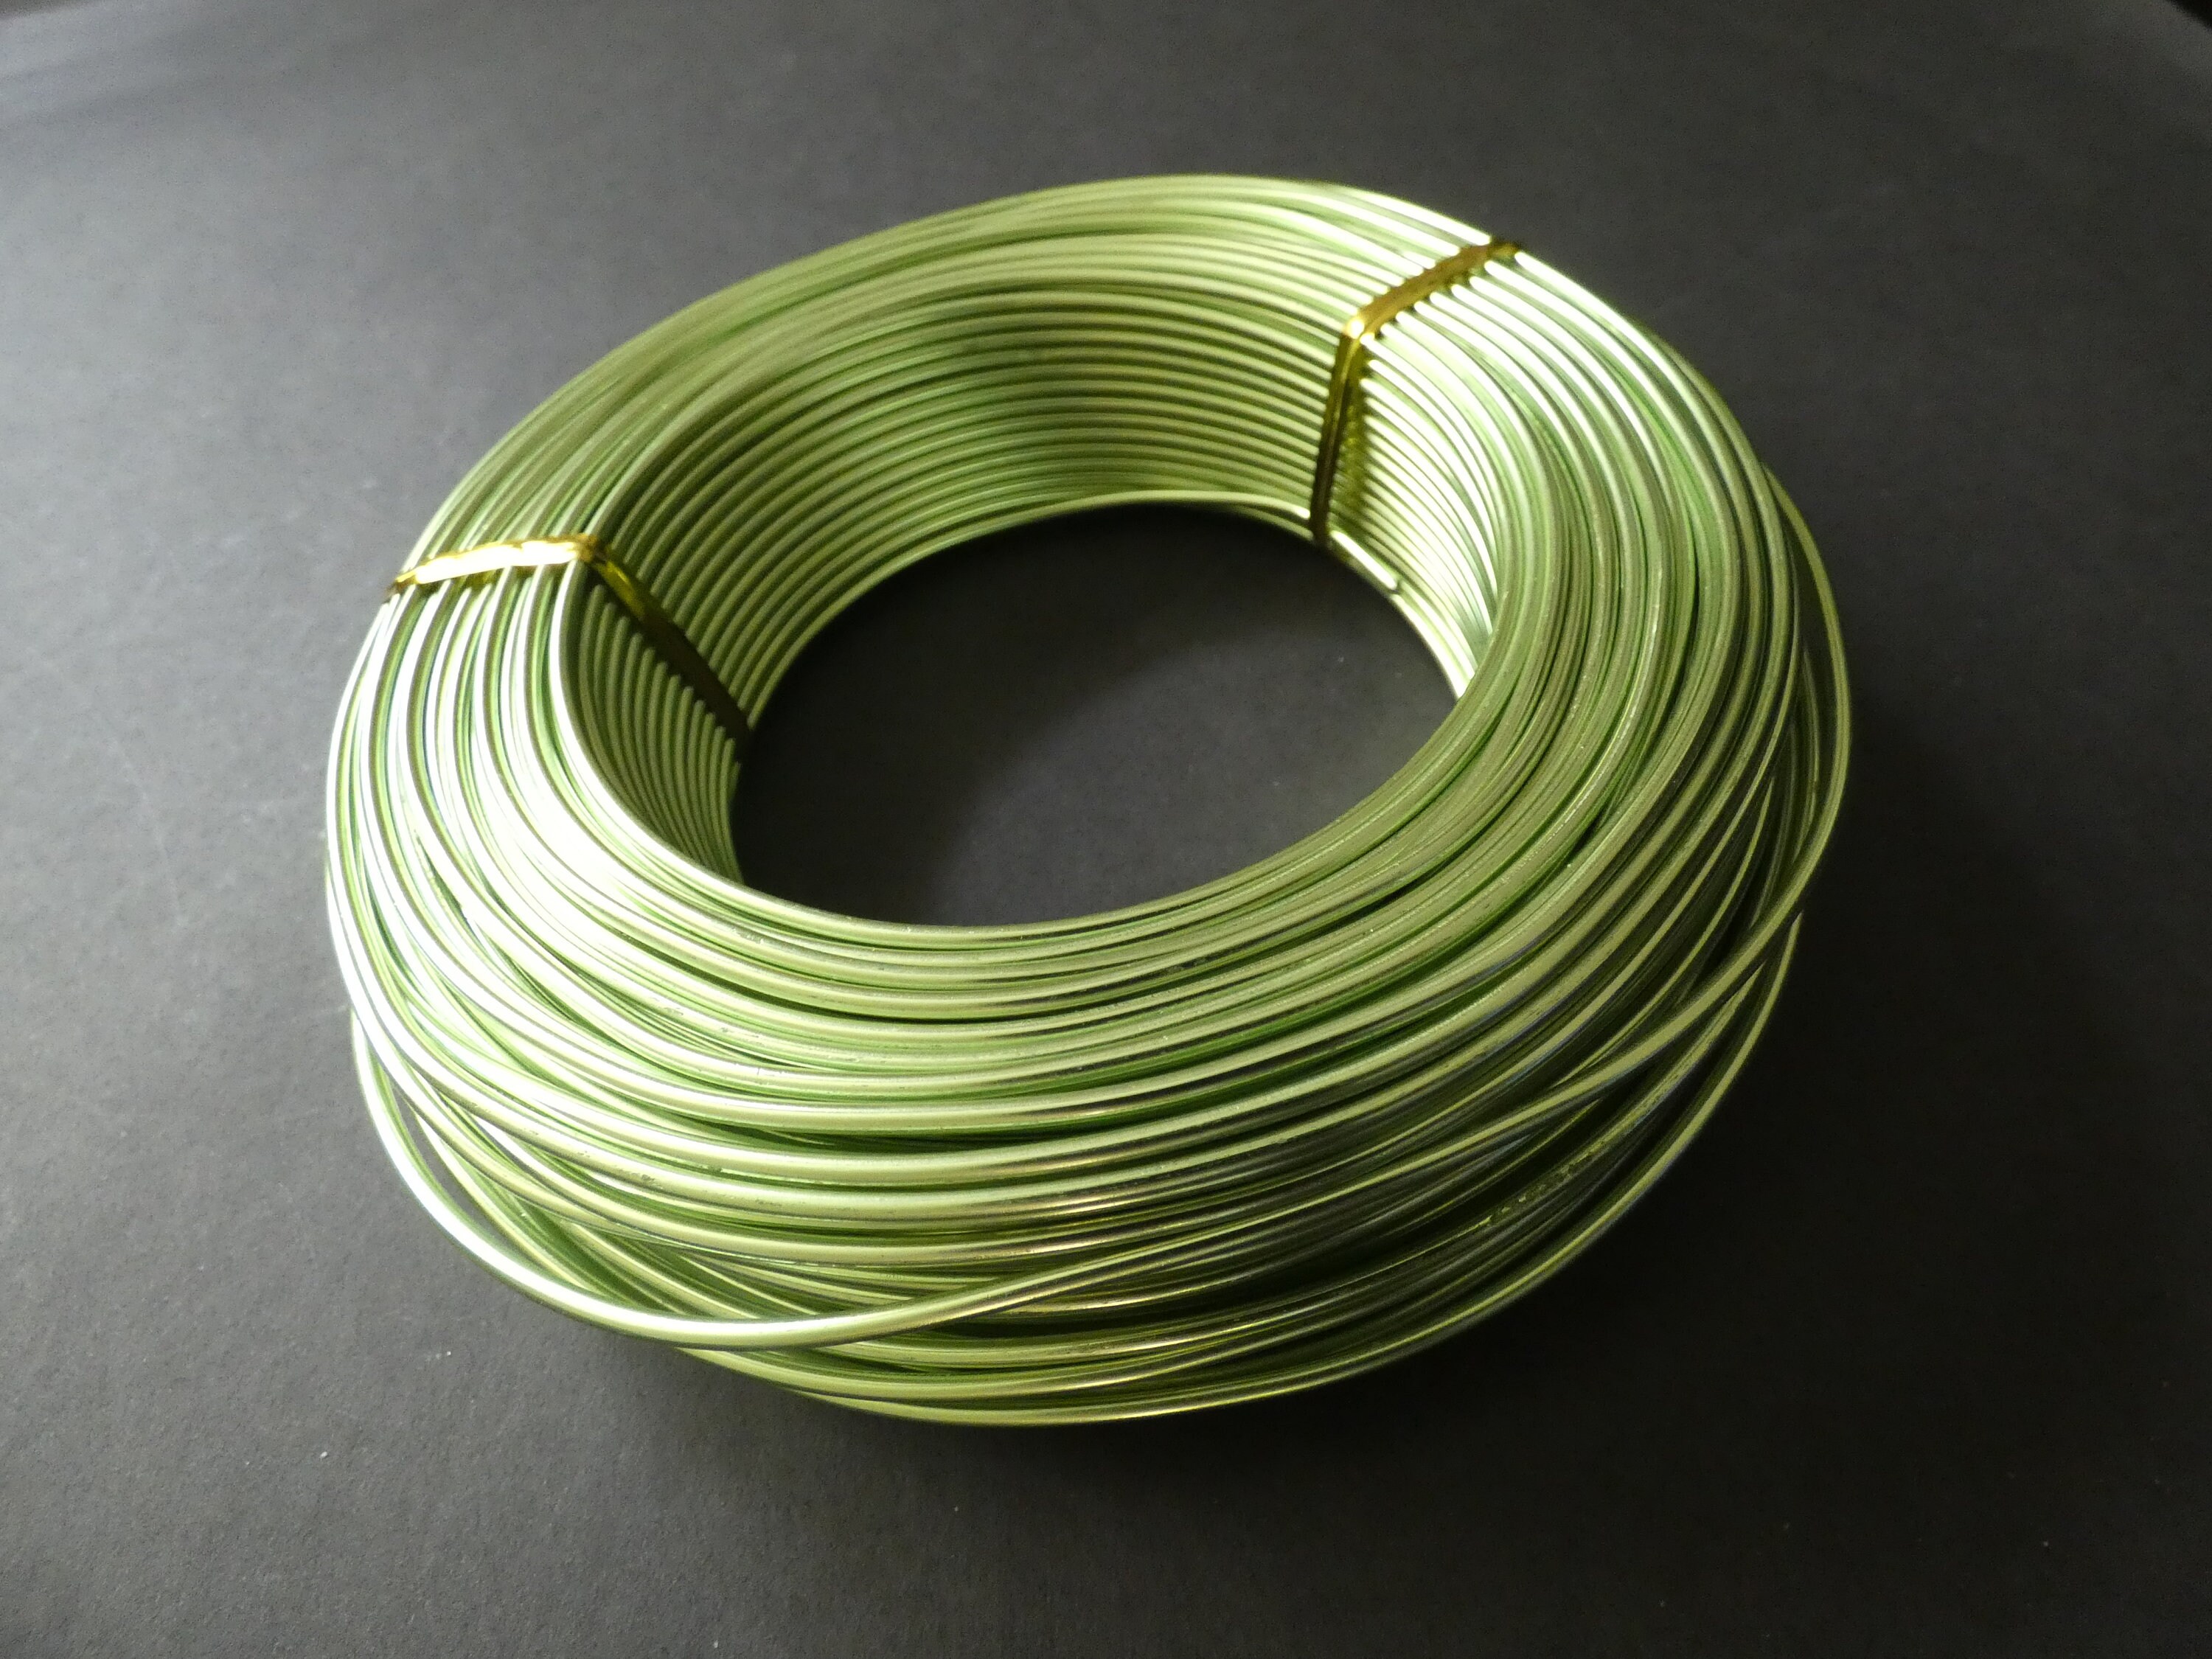 55 Meters Of 2mm Green Yellow Aluminum Jewelry Wire, 2mm Diameter, 500  Grams Beading Wire, Yellow Metal Wire, Jewelry Making & Wire Wrapping